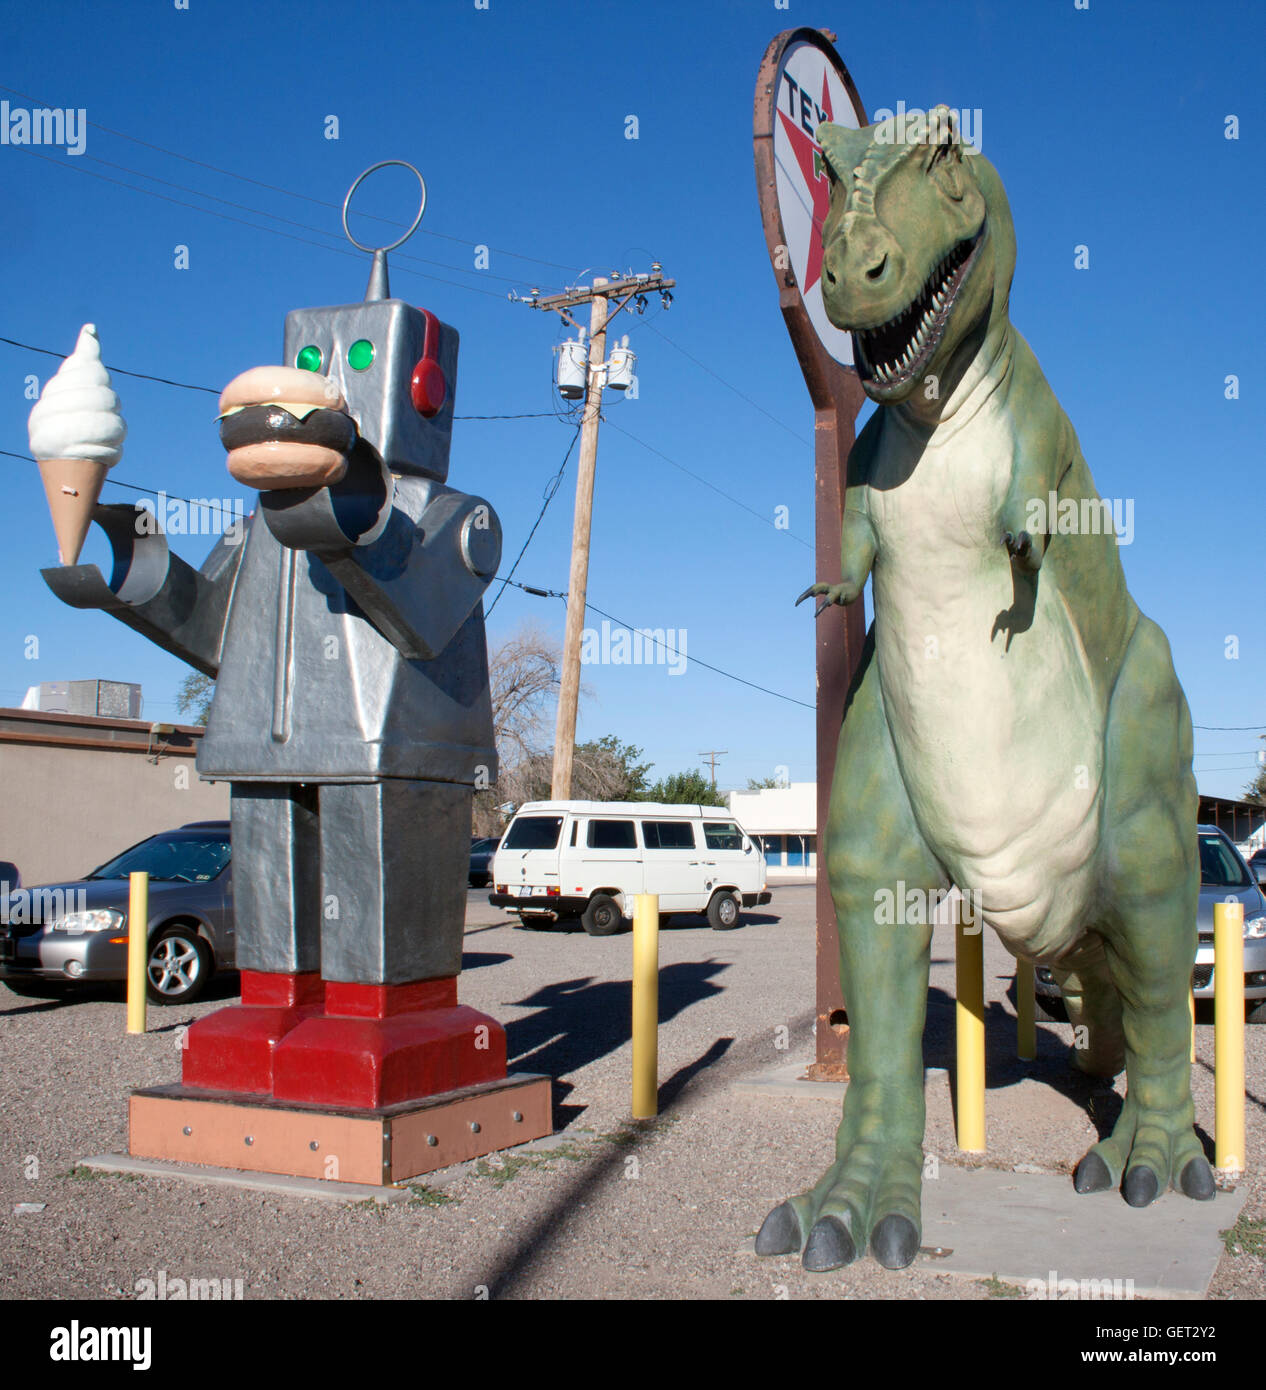 Robot holding an ice cream cone and hamburger and dinosaur outside a restaurant in Hatch New Mexico Stock Photo